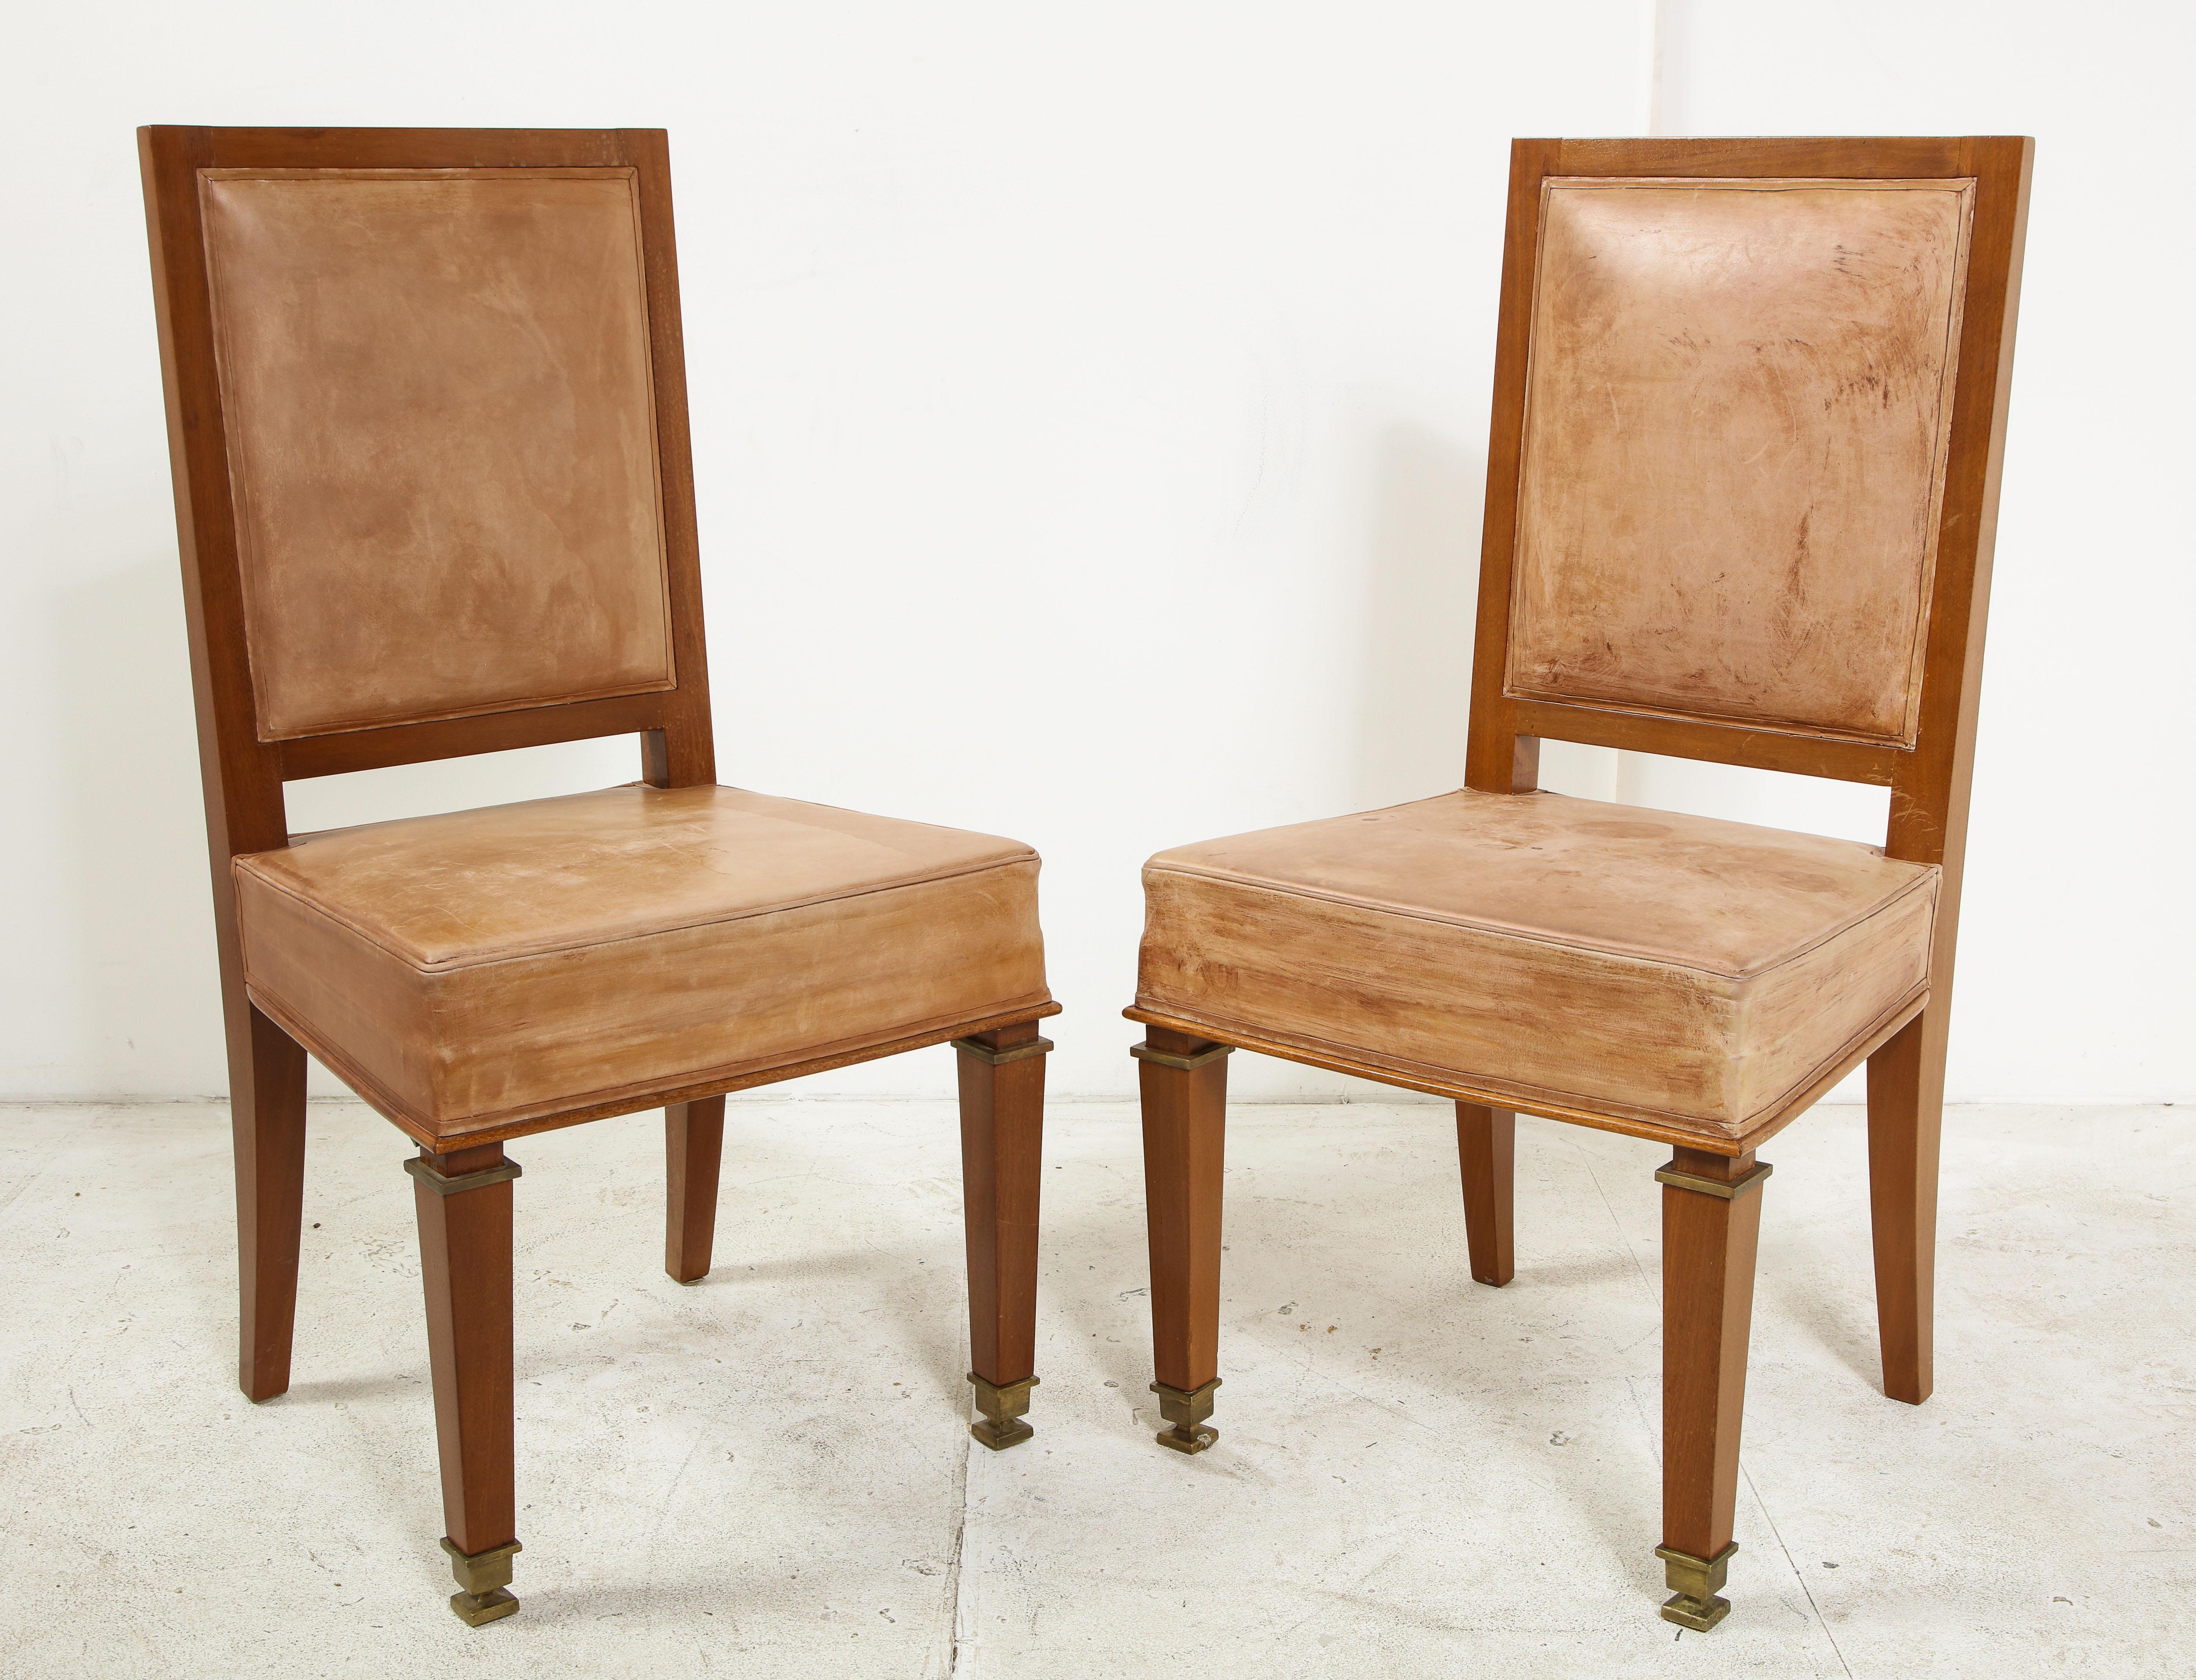 An immaculate pair of cerused oak side chairs by André Arbus with tan leather seat and back. Brass caps and carved details on the front legs.